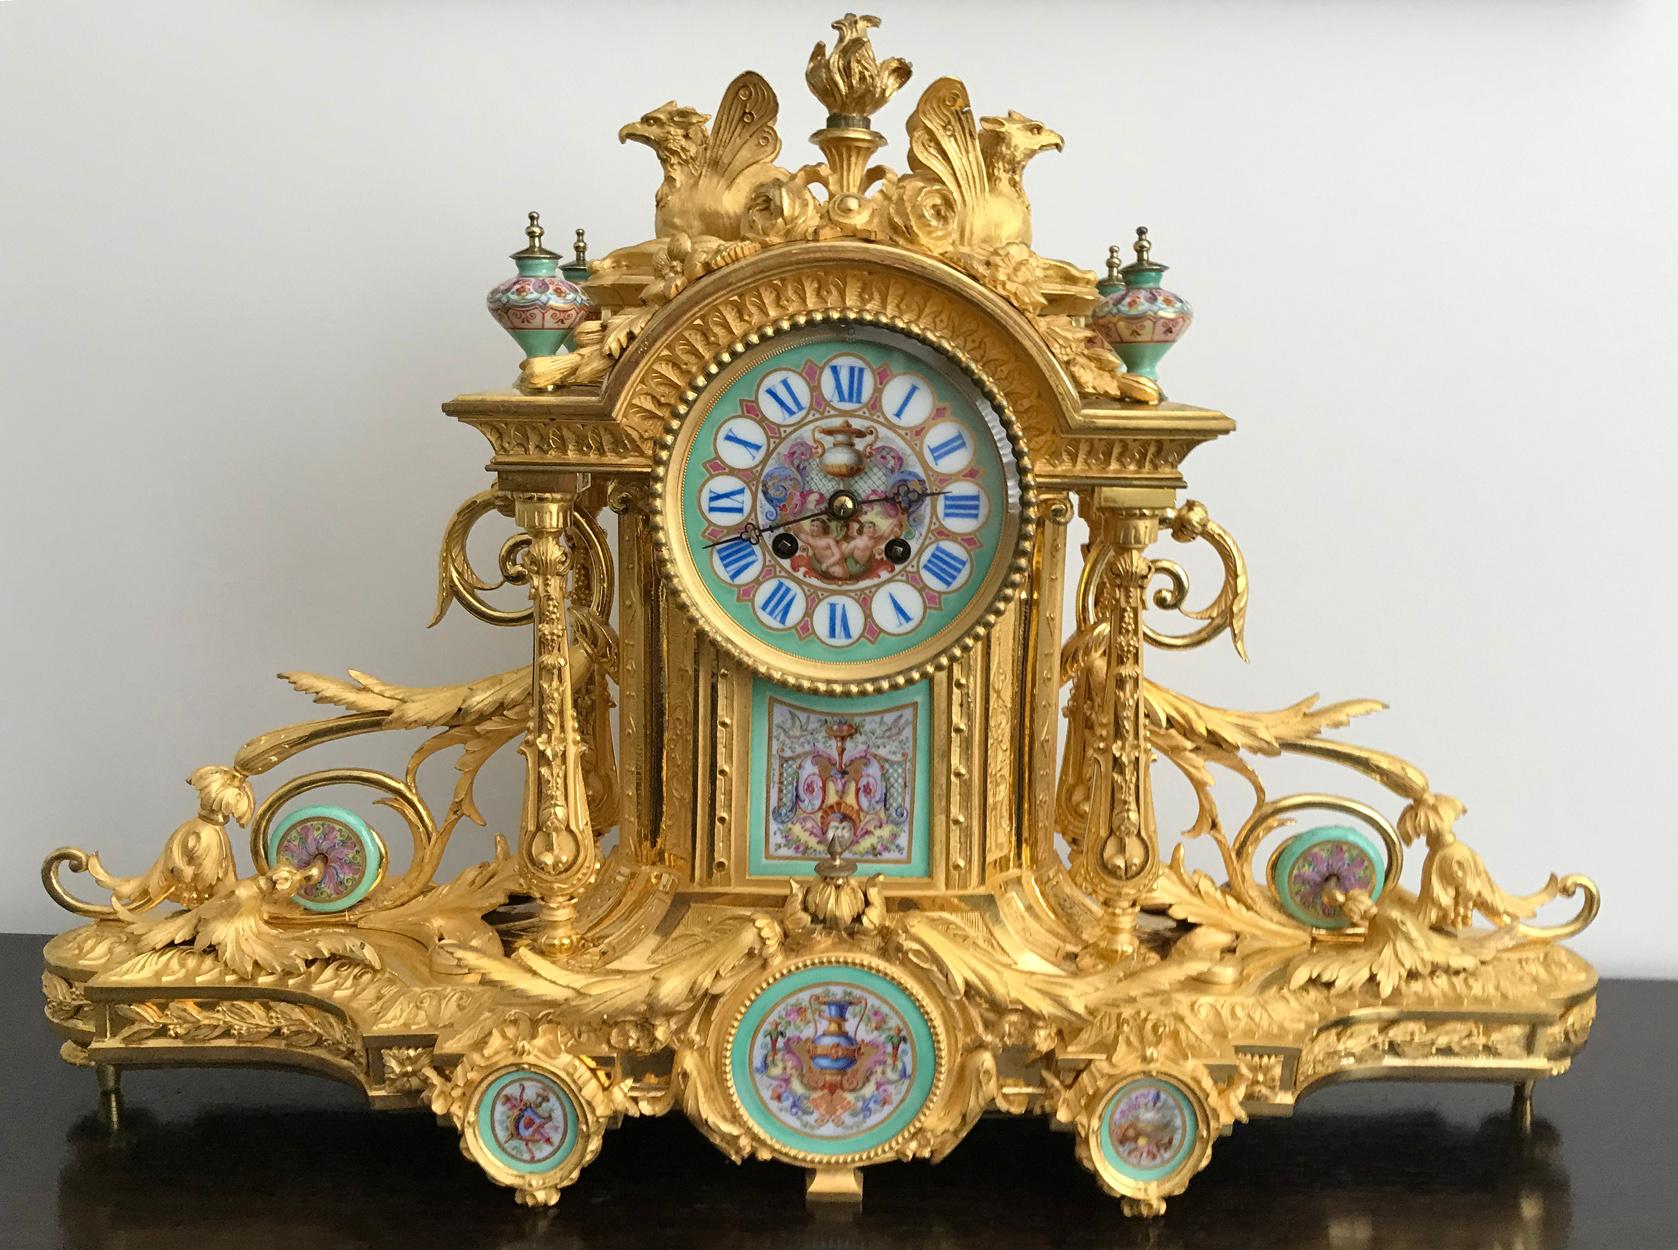 A magnificent Napoleon III Sèvres Porcelain mounted gilt bronze mantel clock, circa 1870 by Howell James & Co, clockmakers to Queen Victoria. 

The profusely decorated case surmounted by a flaming torchère and two winged Griffin, with a painted